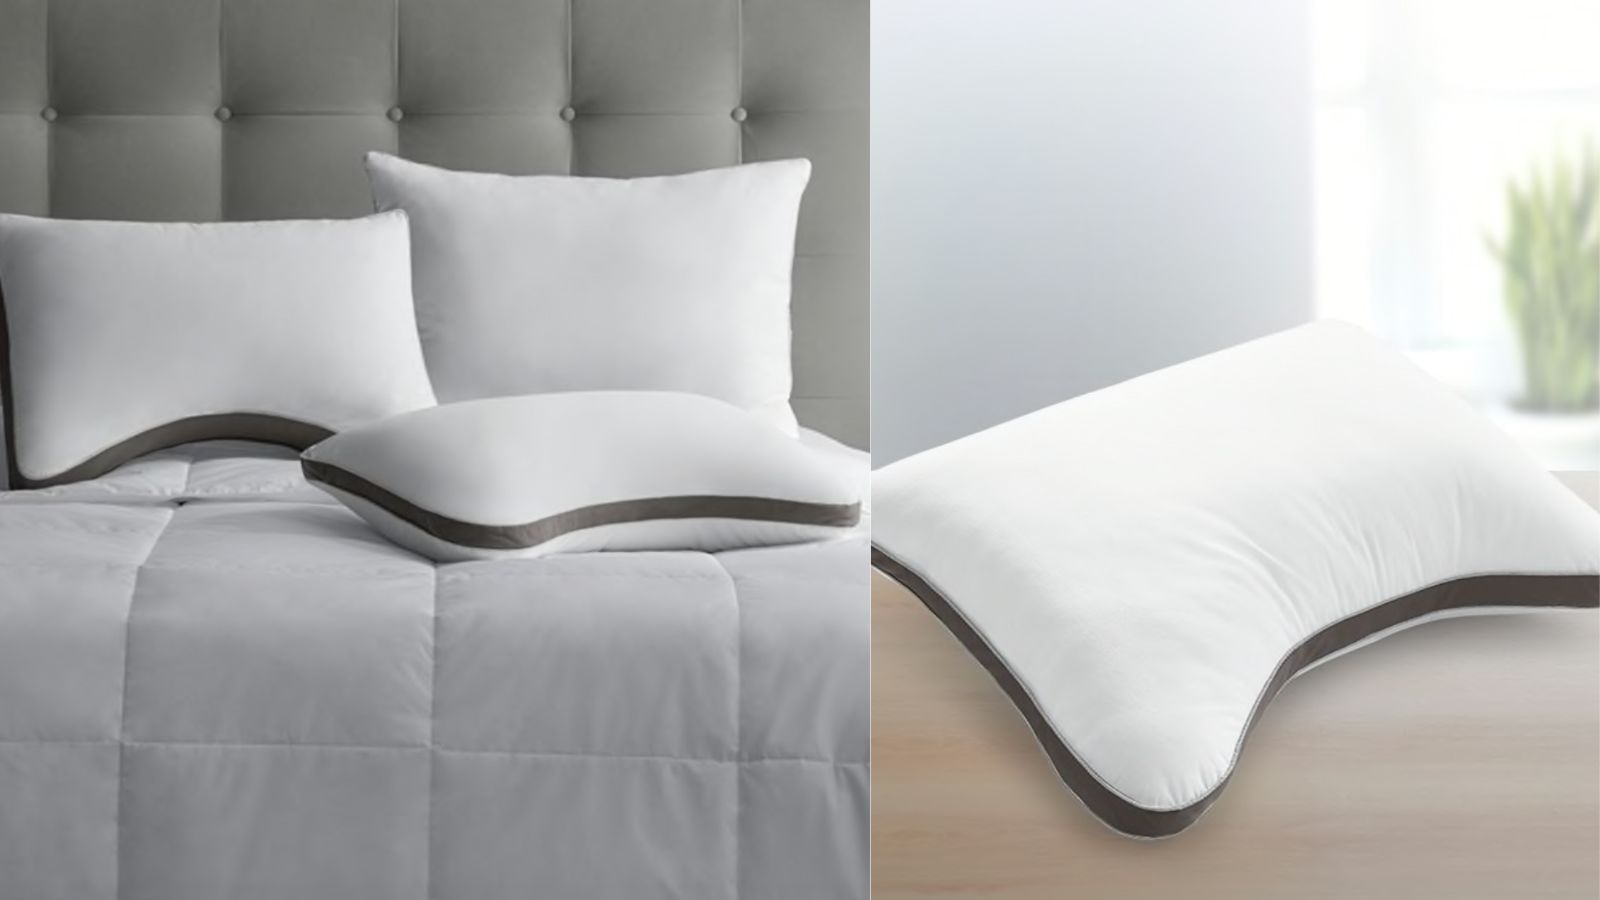 Sleep Number's pillow collection is customized for your sleep